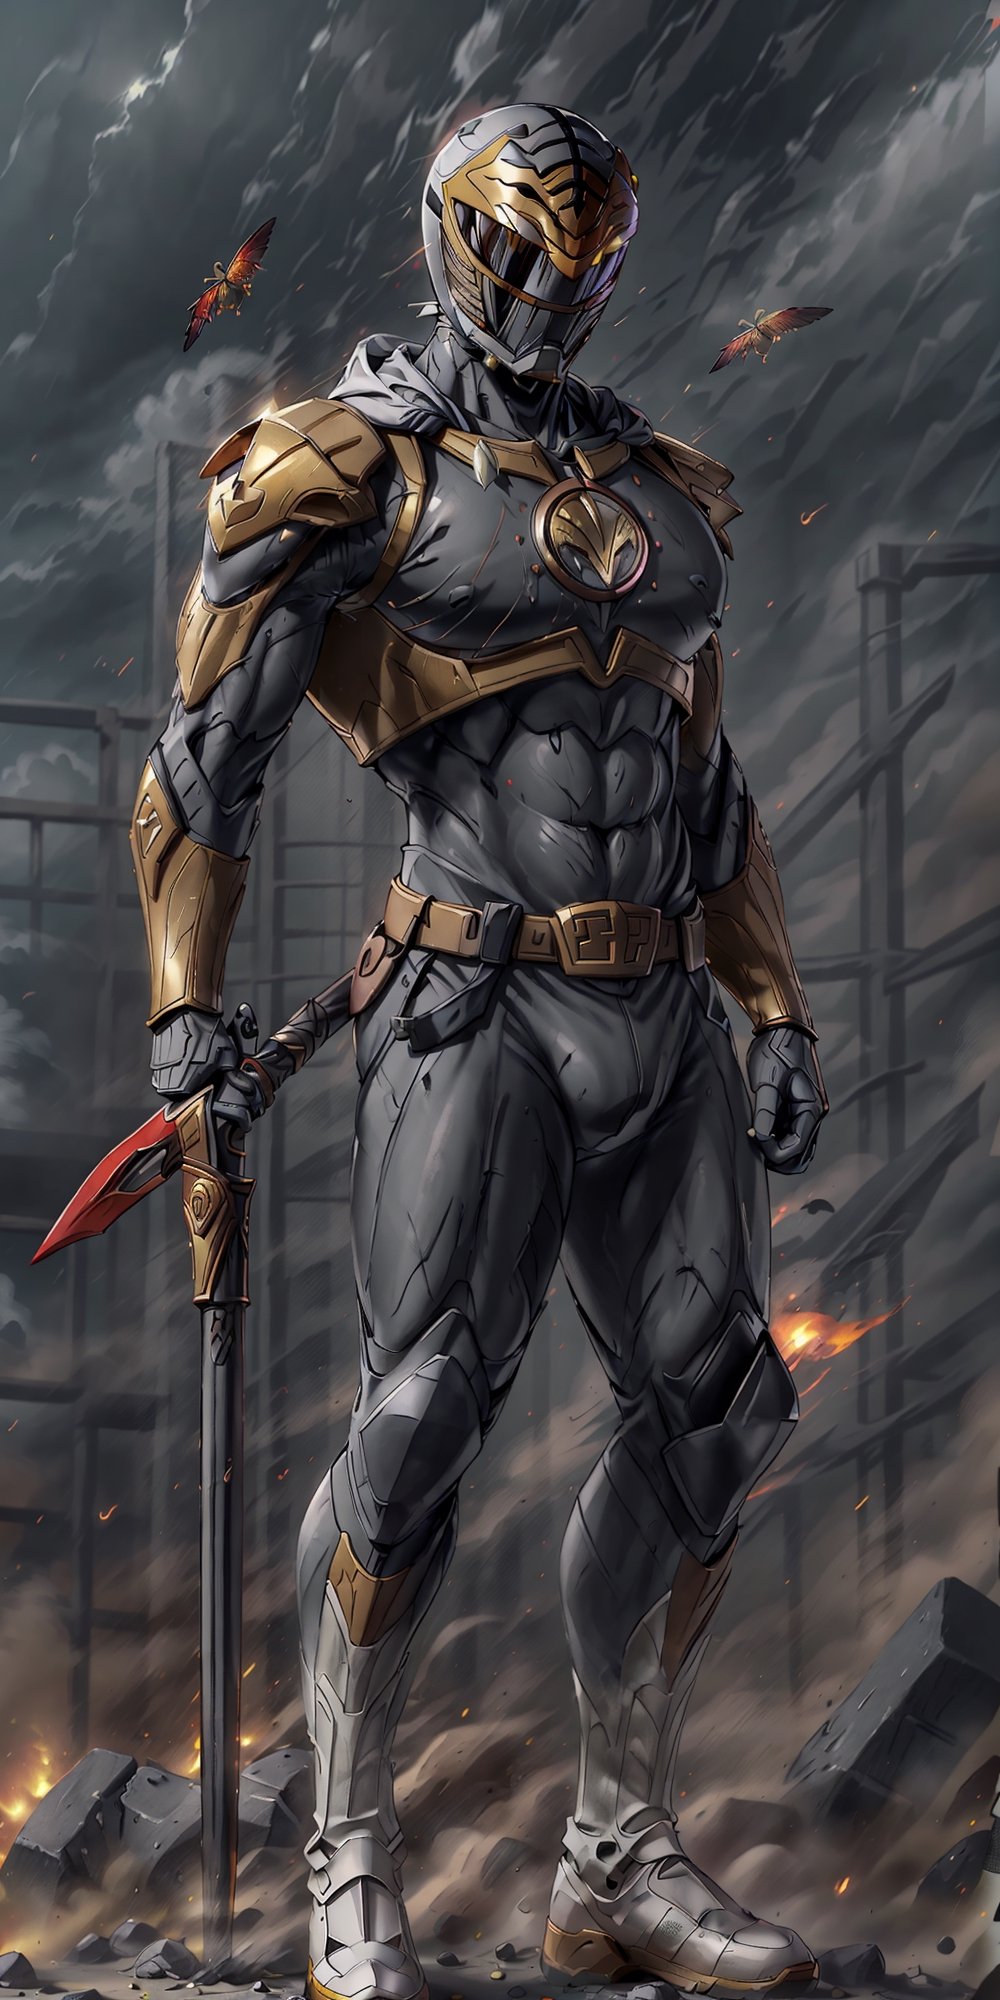 ((masterpiece, best quality)), power ranger, power ranger suit, full body, earth explosion, mix of fantastic and realistic elements, uhd image, vibrant illustrations, hdr, ultra hd, 4k,White_Ranger,solo, black breastplate, detailed helmet and armor,Gold_Zeo_Ranger,ANIME,spartan,1utf1,straw hat,abs, male,wowdk,fantasy00d,LegionJoey, mask,hooded jacket,zomb00d,Arthur,Weapon,nvwashi,EpicArt,caelus,gray hair,yellow eyes,4rmorbre4k,jensenDX,salttech,FFIXBG,rototech,firefliesfireflies,huoshen,zhurongshi,black sclera, BJ_Sacred_beast,no_humans,scar on chest,red shirt,yoshida_csm,Gangster,Bertlot,glowing skin,molten rock skin,midjourney,long hair,horror,School Classroom,Circle,DonMG414 